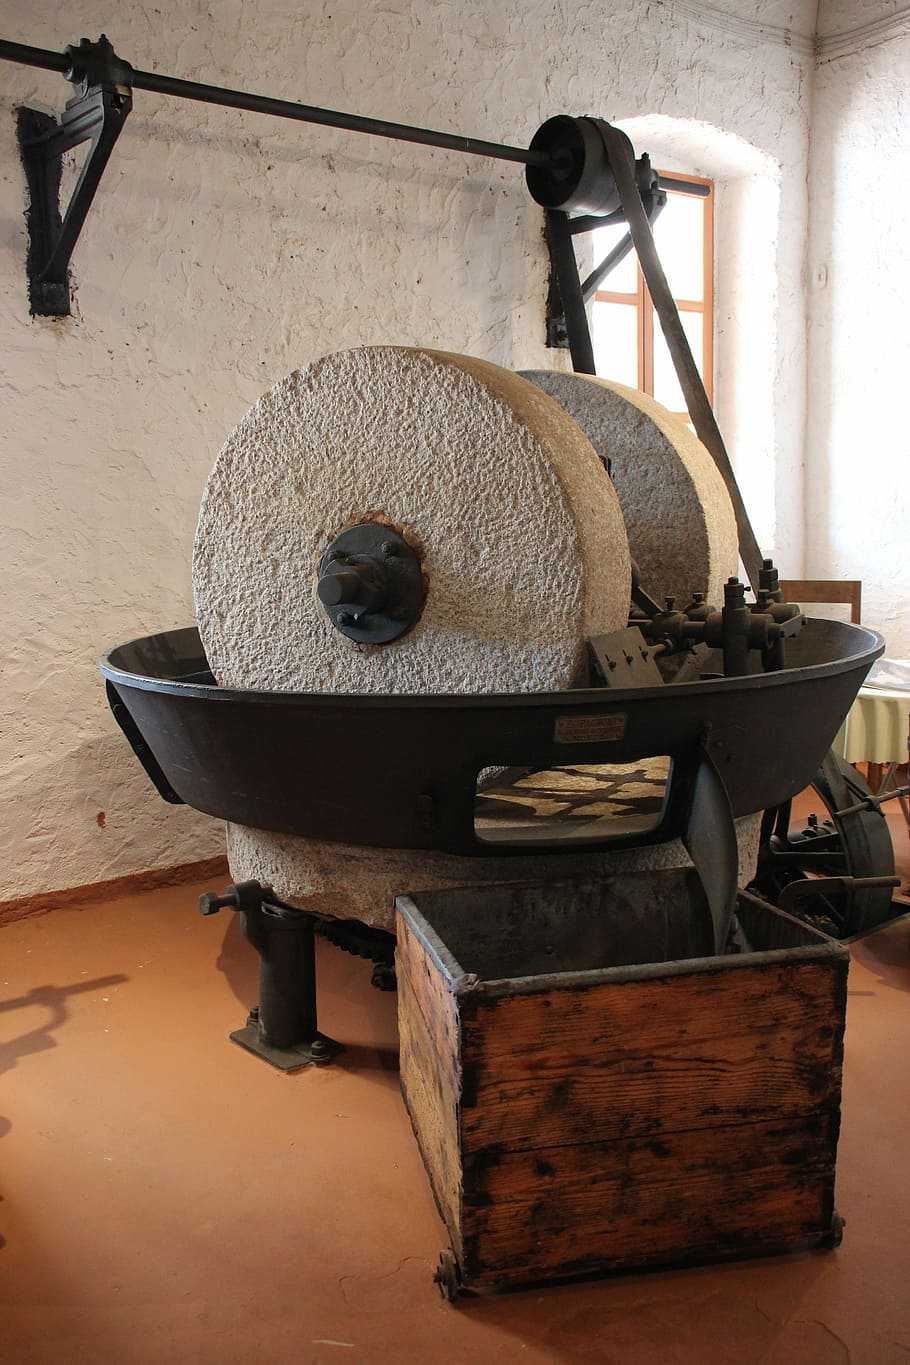 Old, Olive Press, Oil, Wheel, Mill, ancient, stone, millstone, mediterranean, agriculture